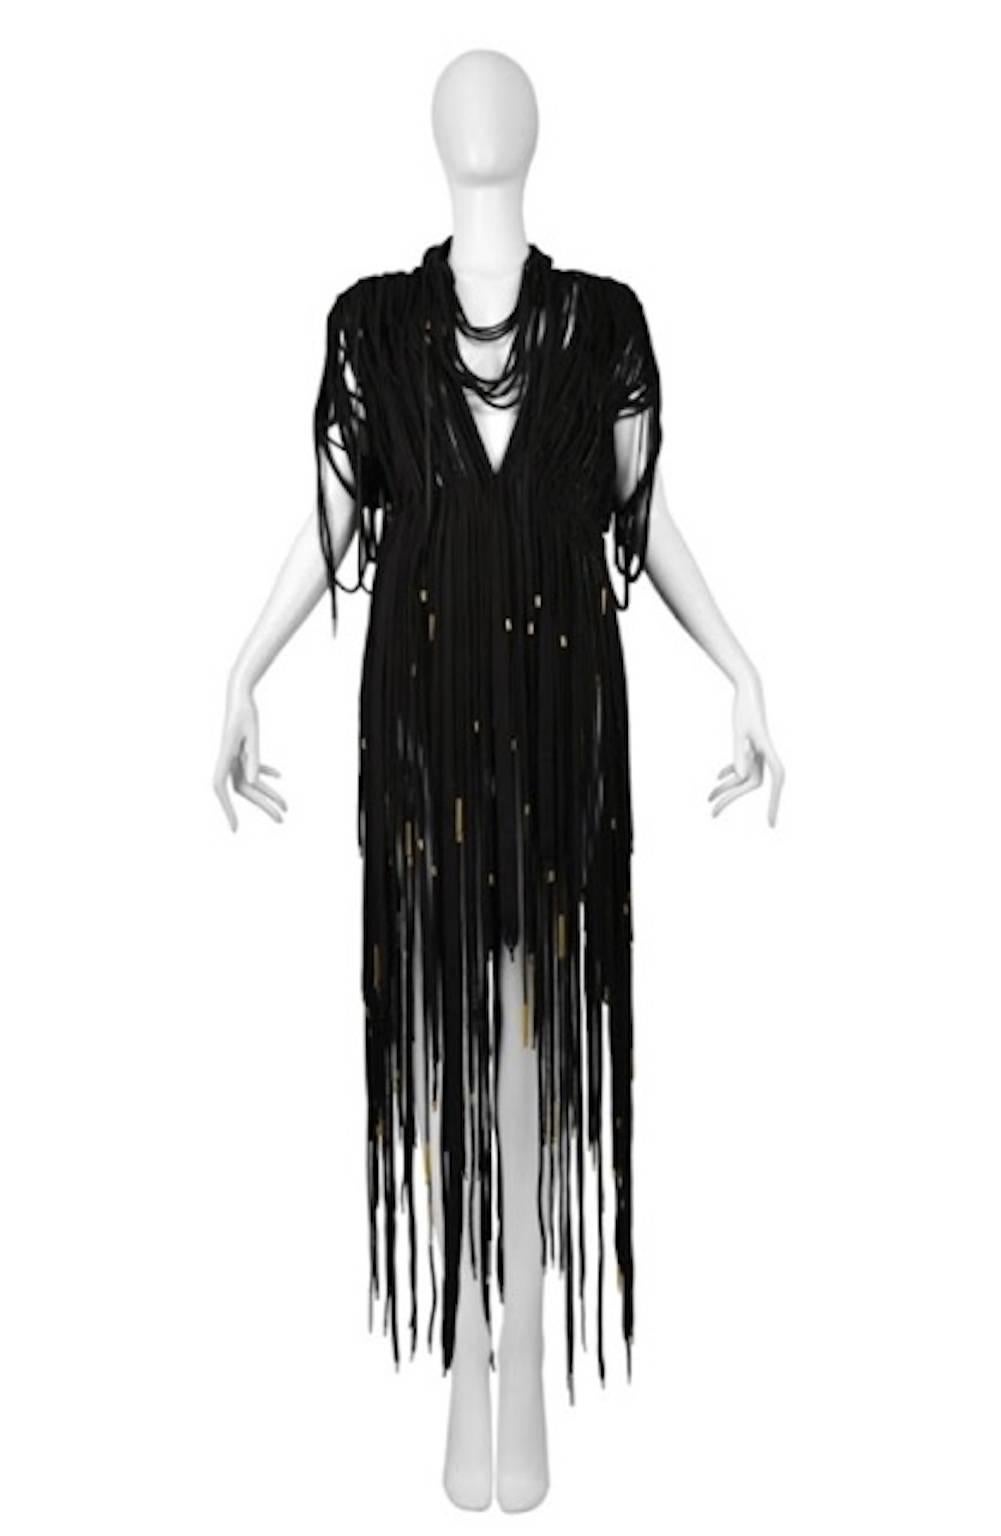 Vintage Maison Martin Margiela Couture Artisanal Shoelace Dress. Dress composed of various black shoestrings. 24 hours to produce. Runway piece from the Spring / Summer 2009 Couture Collection.